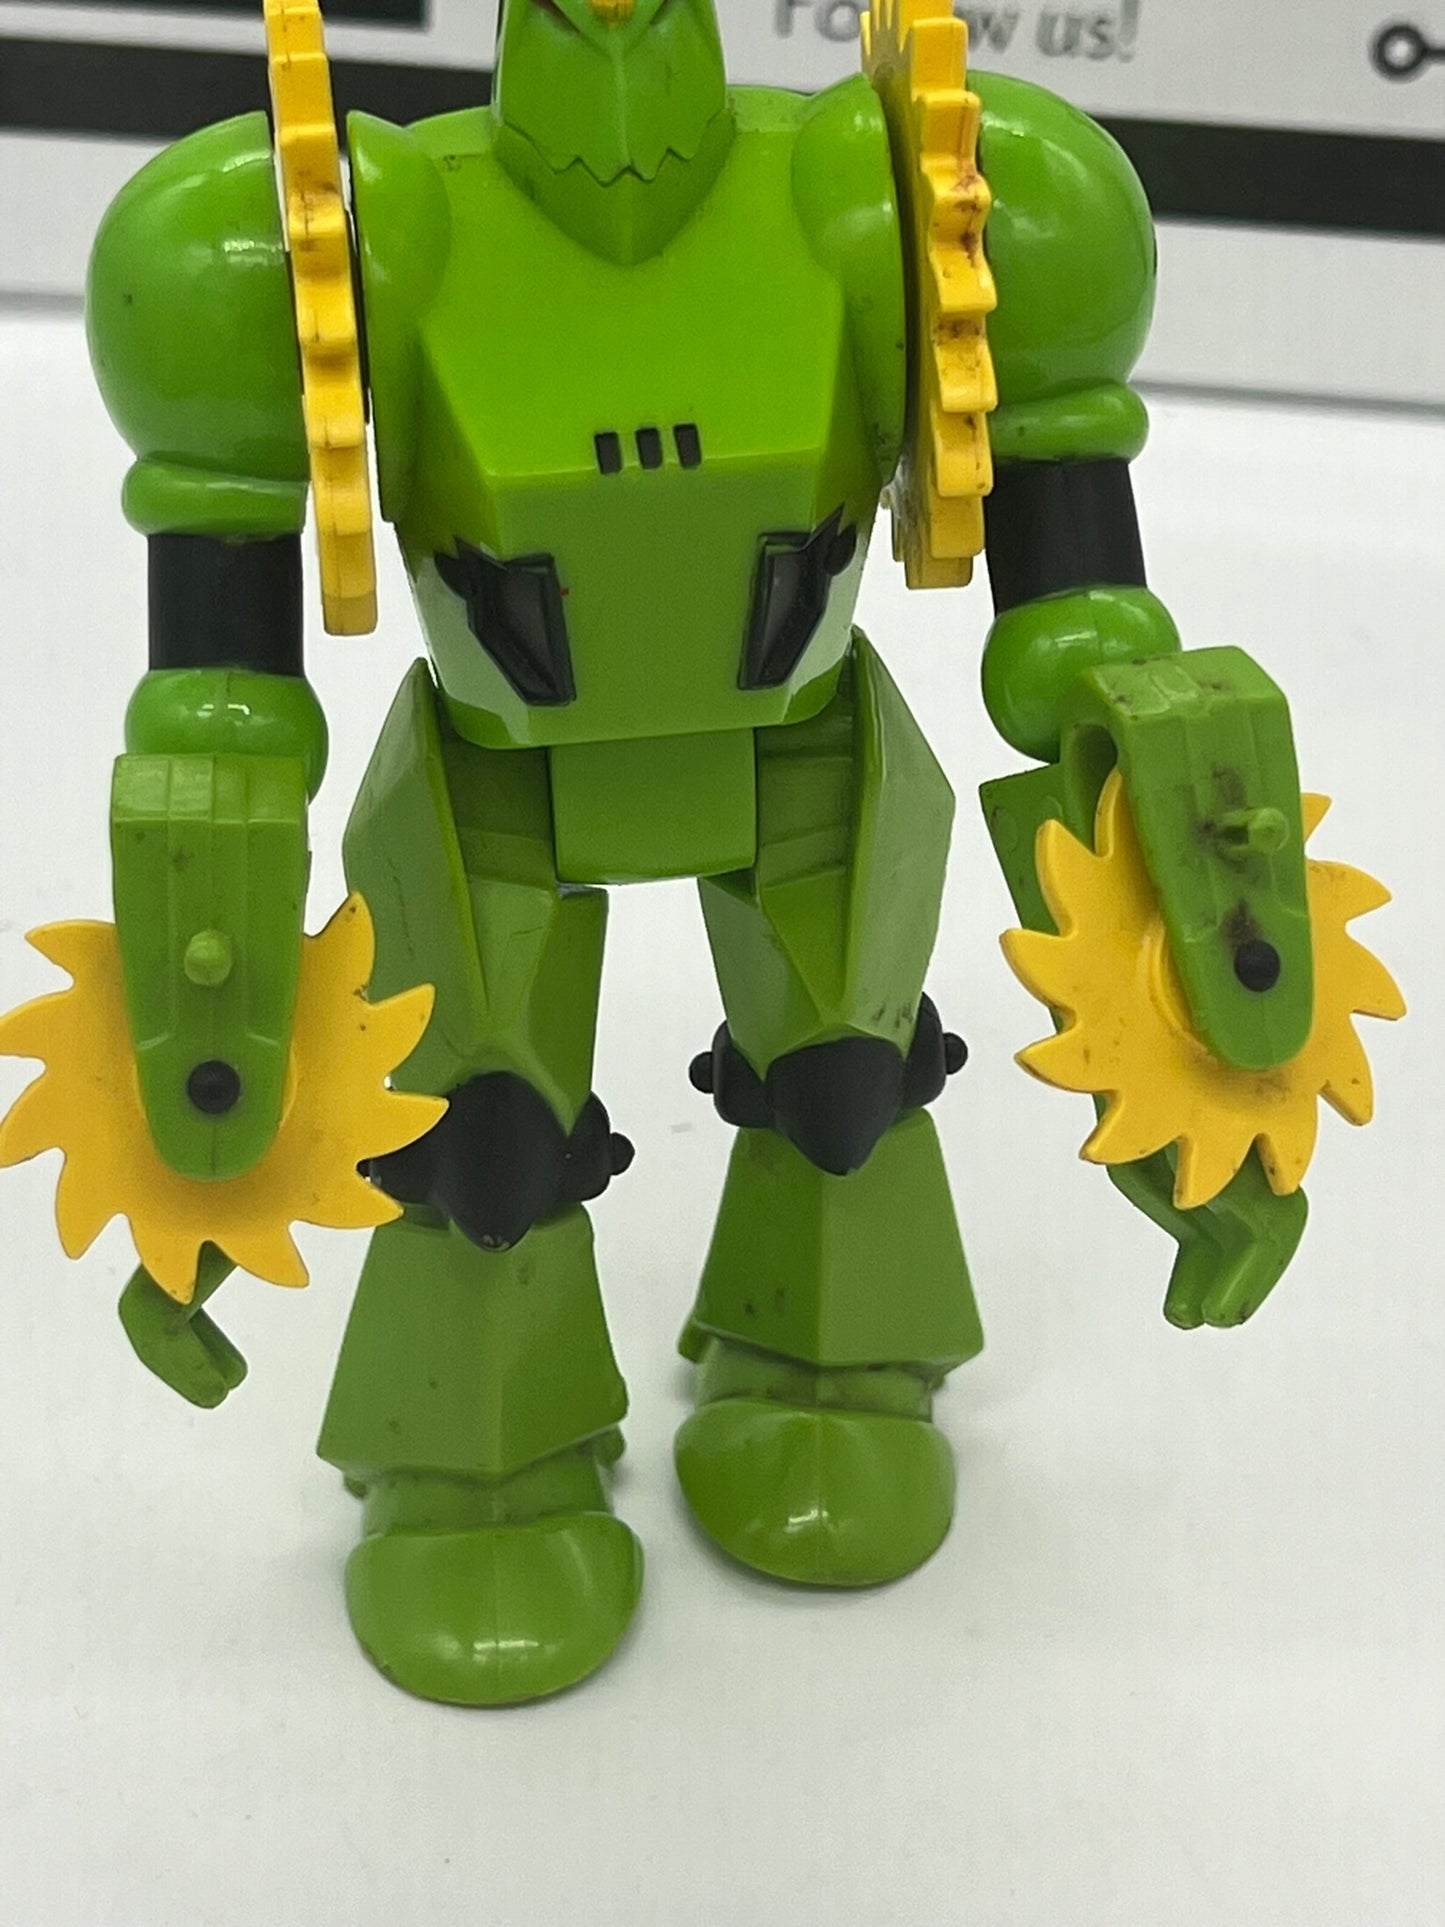 Buzz-Saw, Vintage Silverhawks Action Figure Complete 1986 Kenner